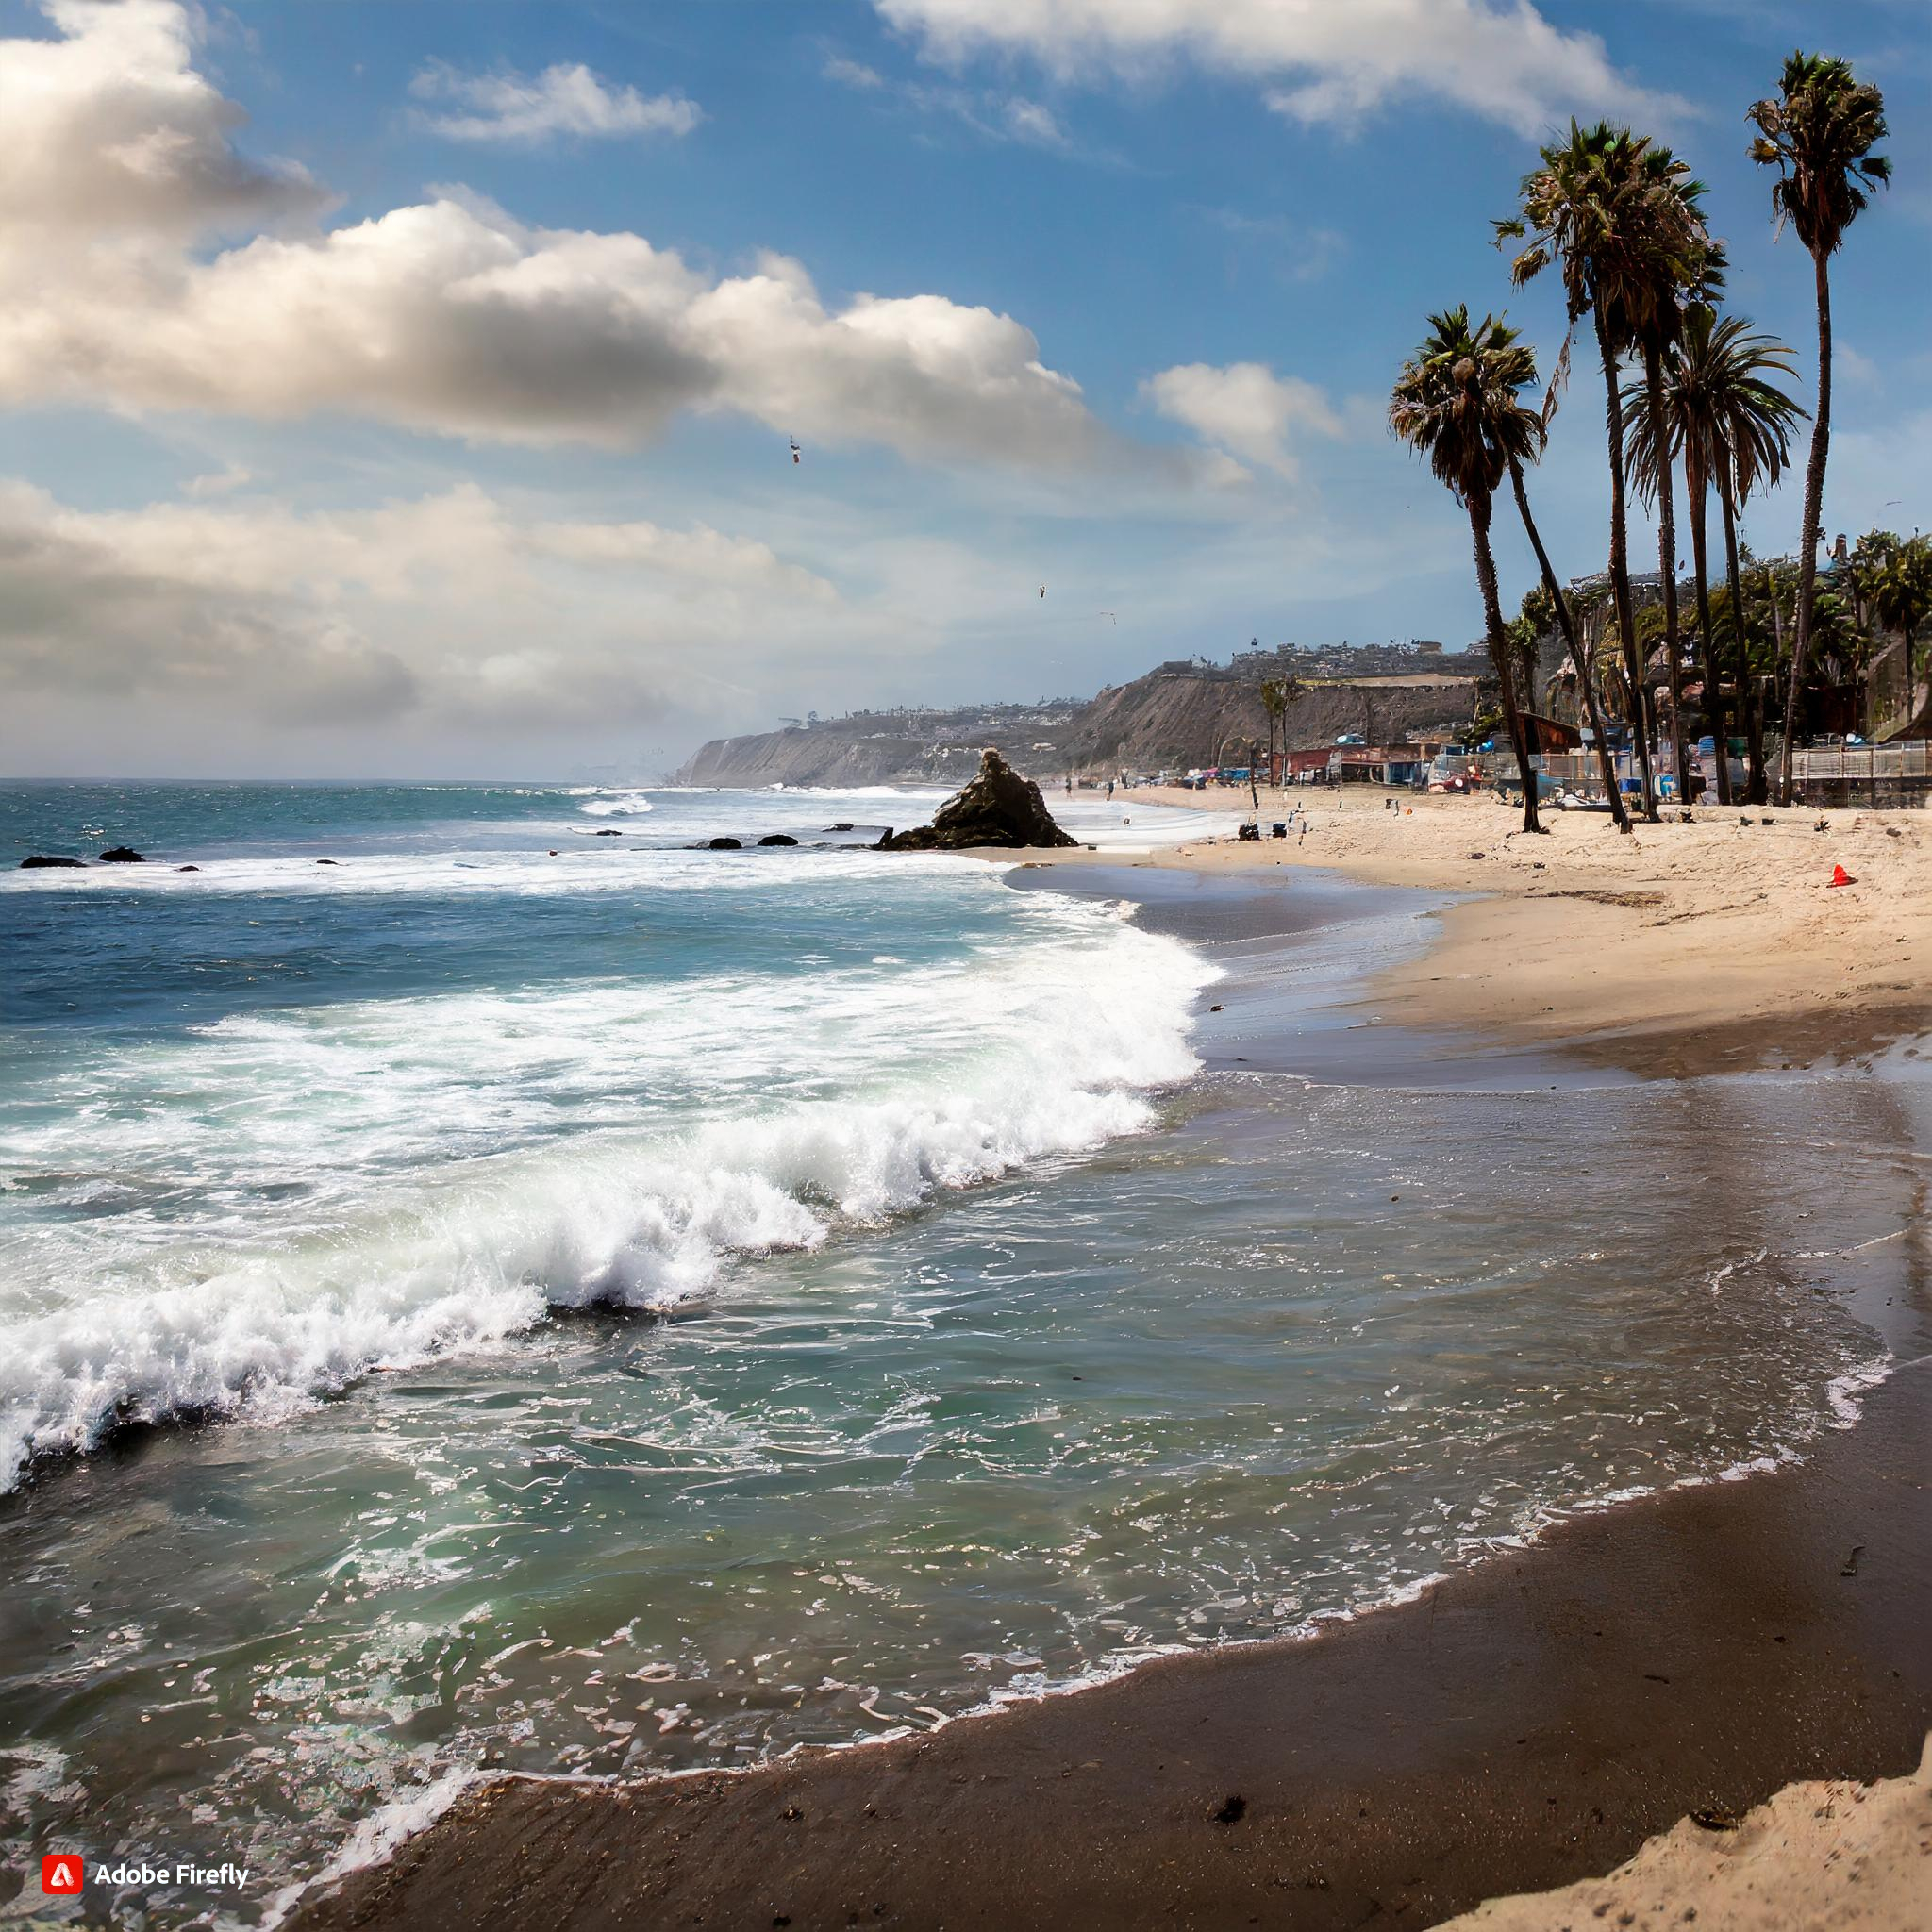 Firefly Los Angeles, California, Sunny Day on the beach with the ocean as the main aspect of the image being the ocean.jpg